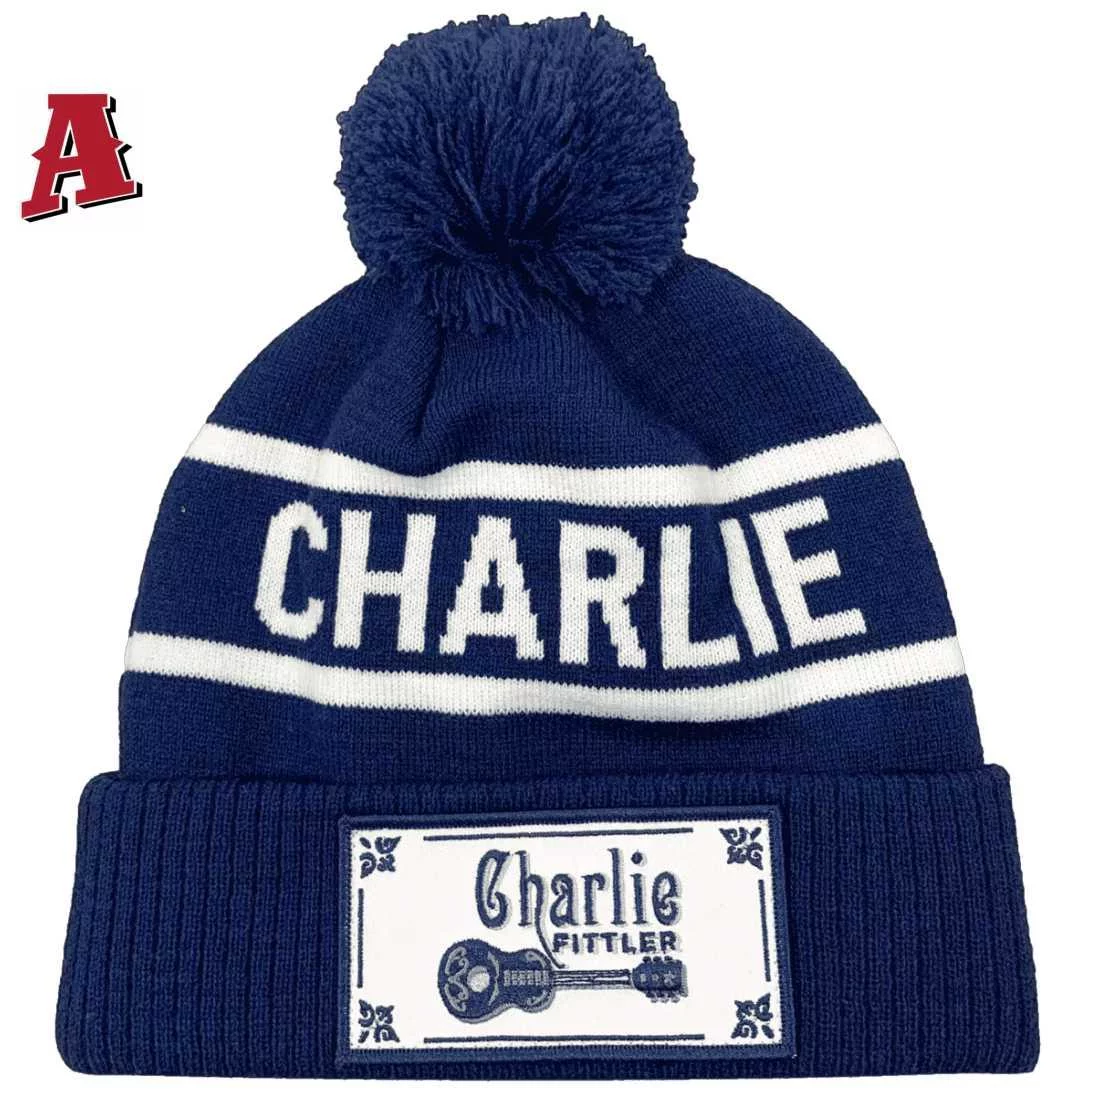 Charlie Fittler Country Music Artist Armidale NSW Aussie Acrylic Beanie with Roll-up Ribbed Cuff and Pom Pom Navy White with sew-on badge